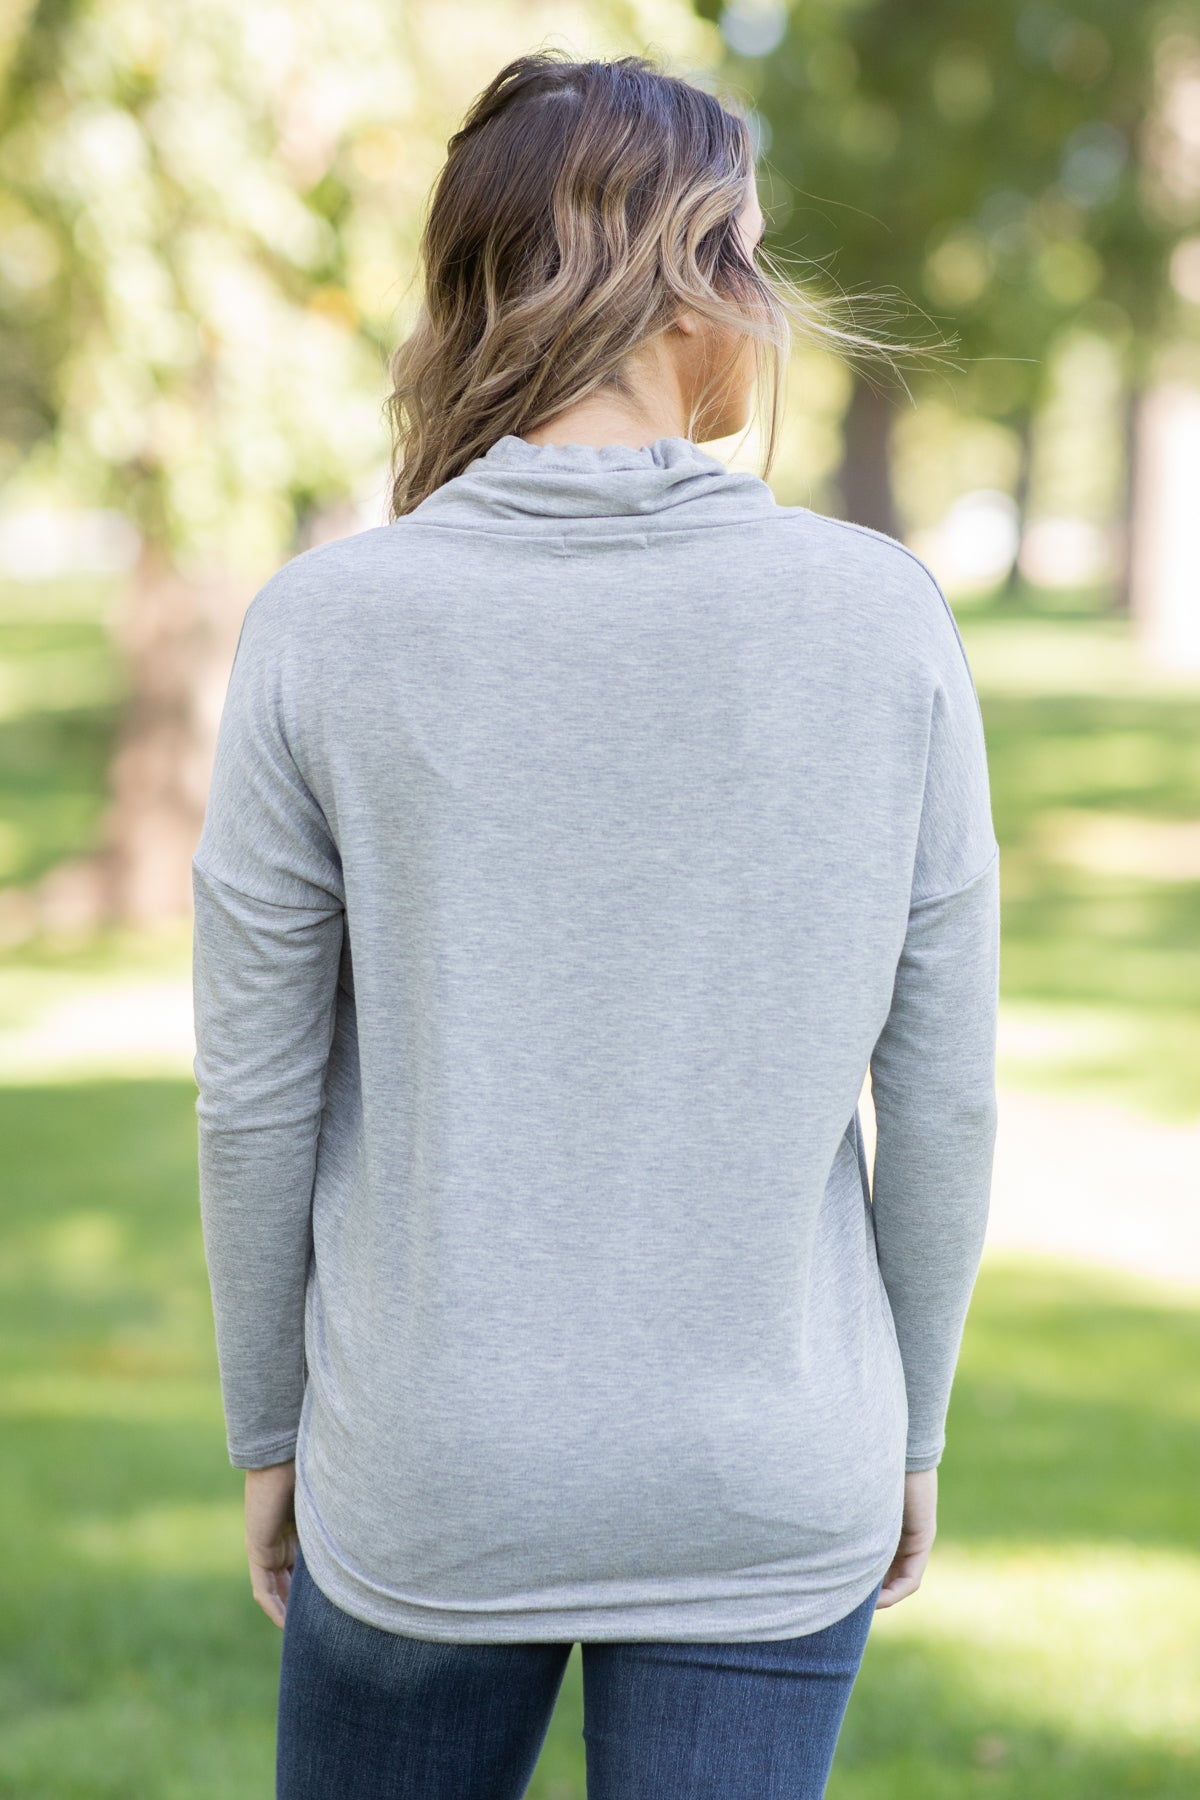 Grey Heathered Cowl Neck Top - Filly Flair